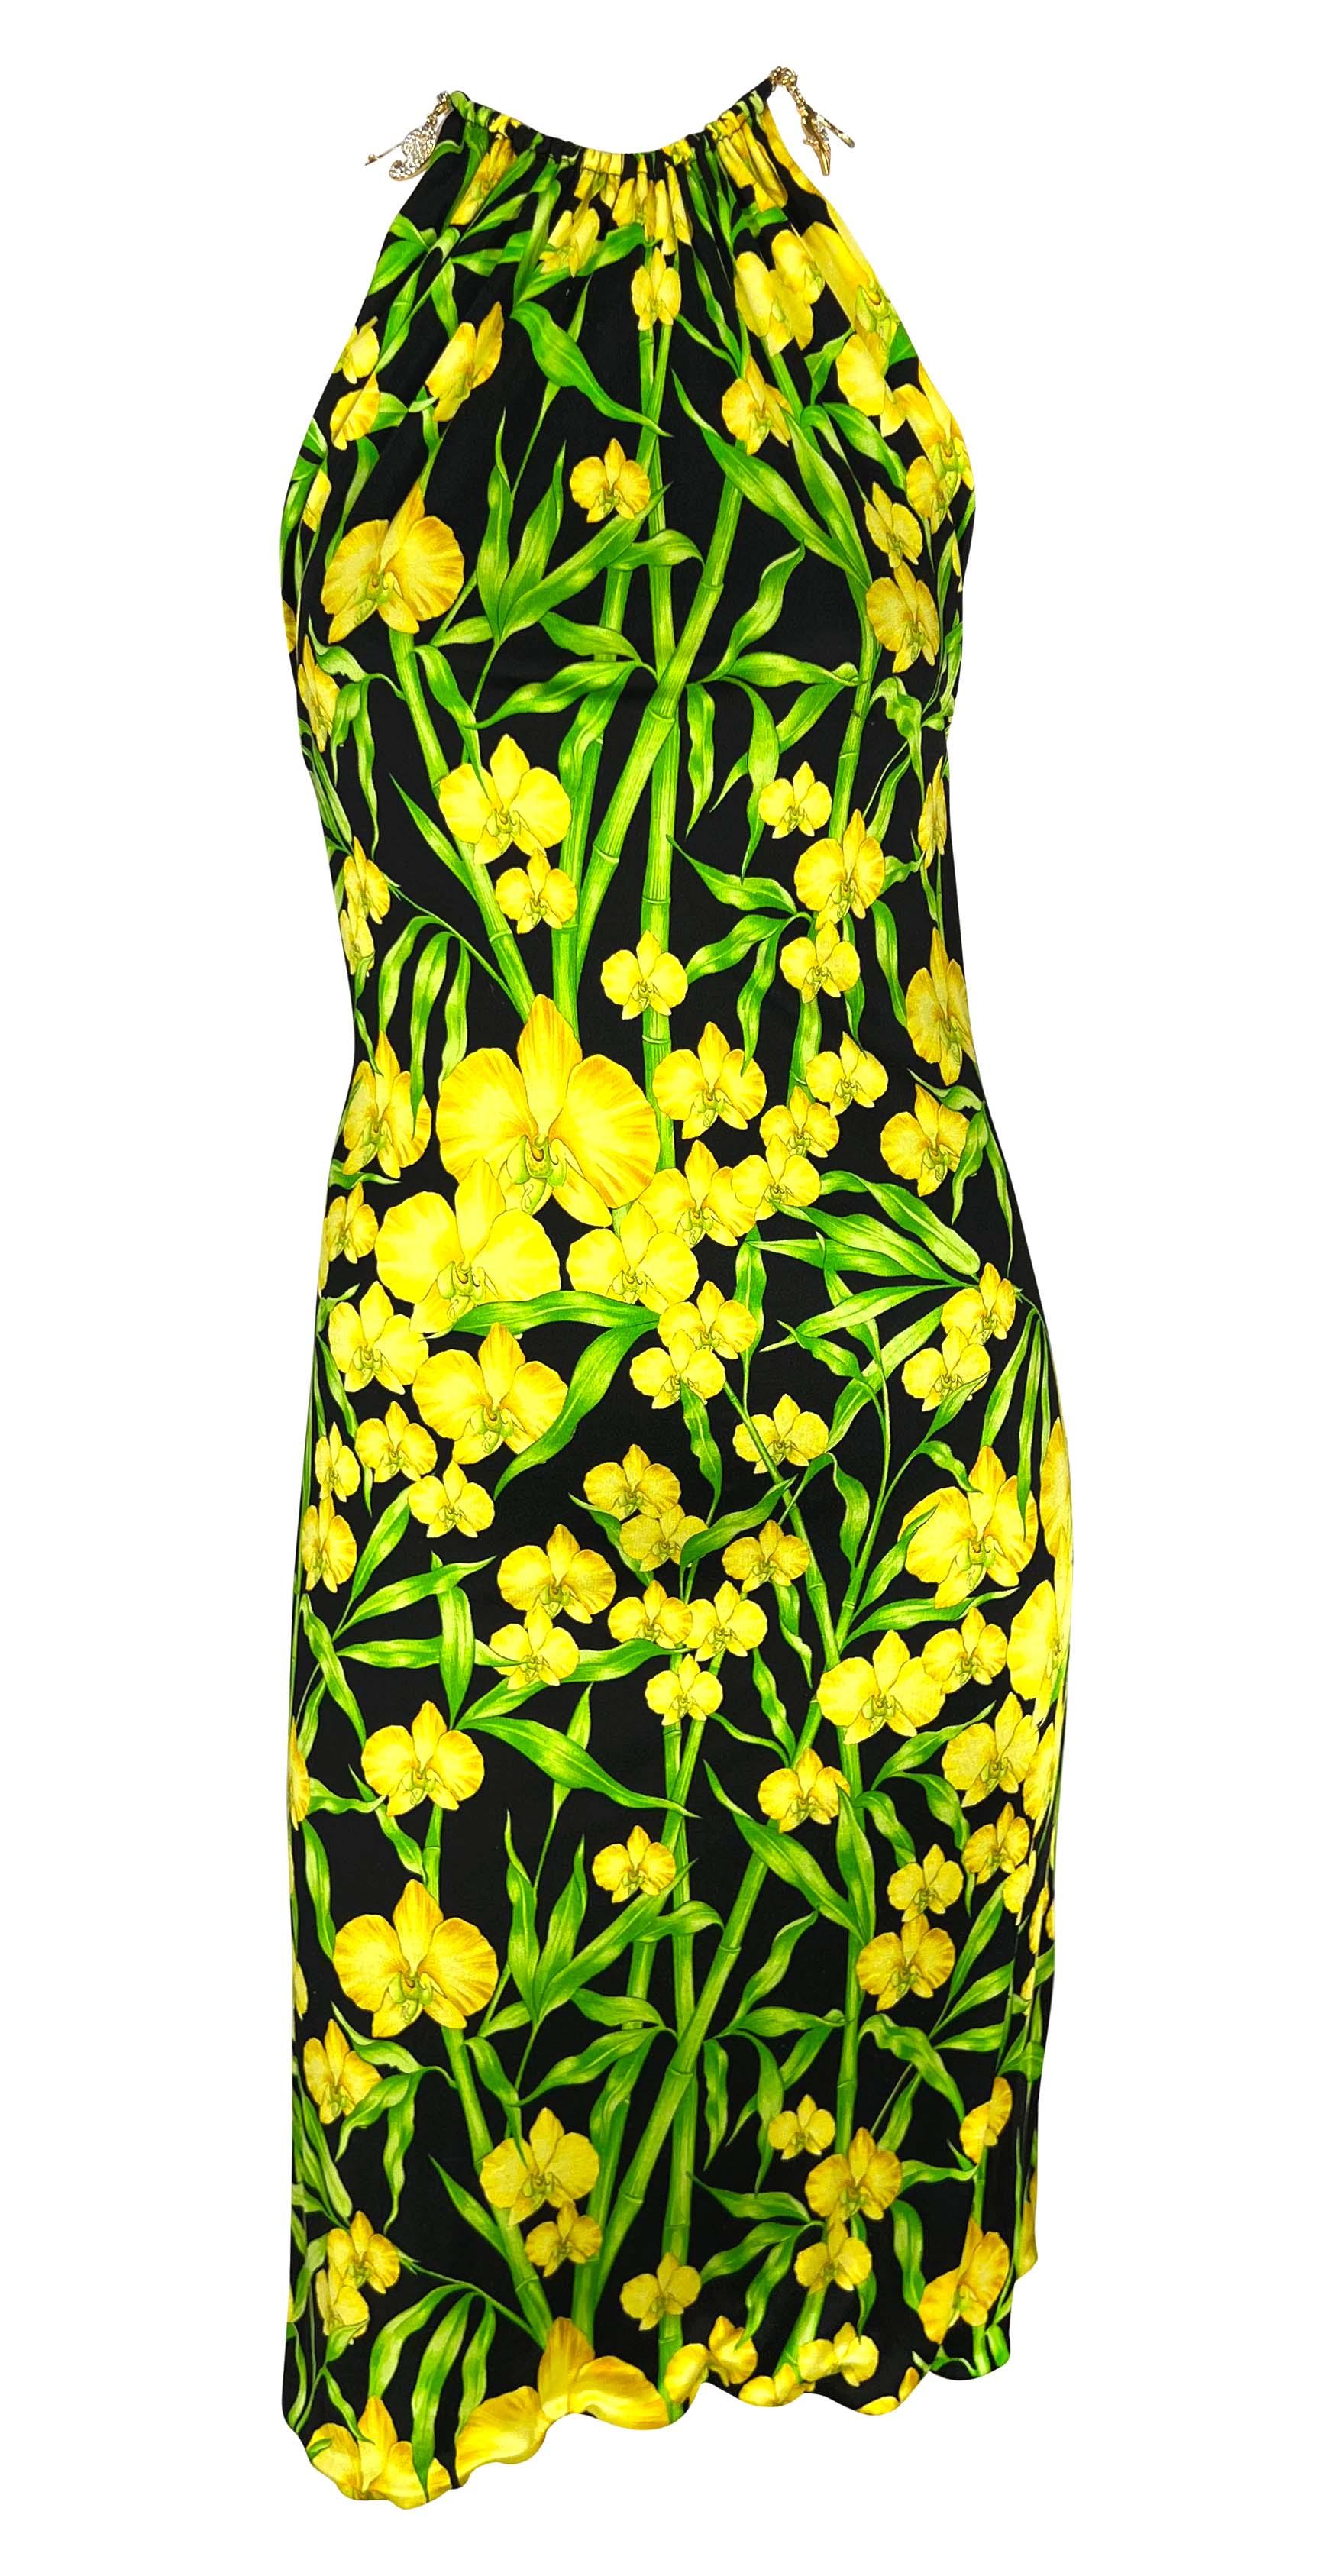 S/S 2000 Gianni Versace by Donatella Jungle Yellow Orchid Stretch Charm Dress For Sale 2